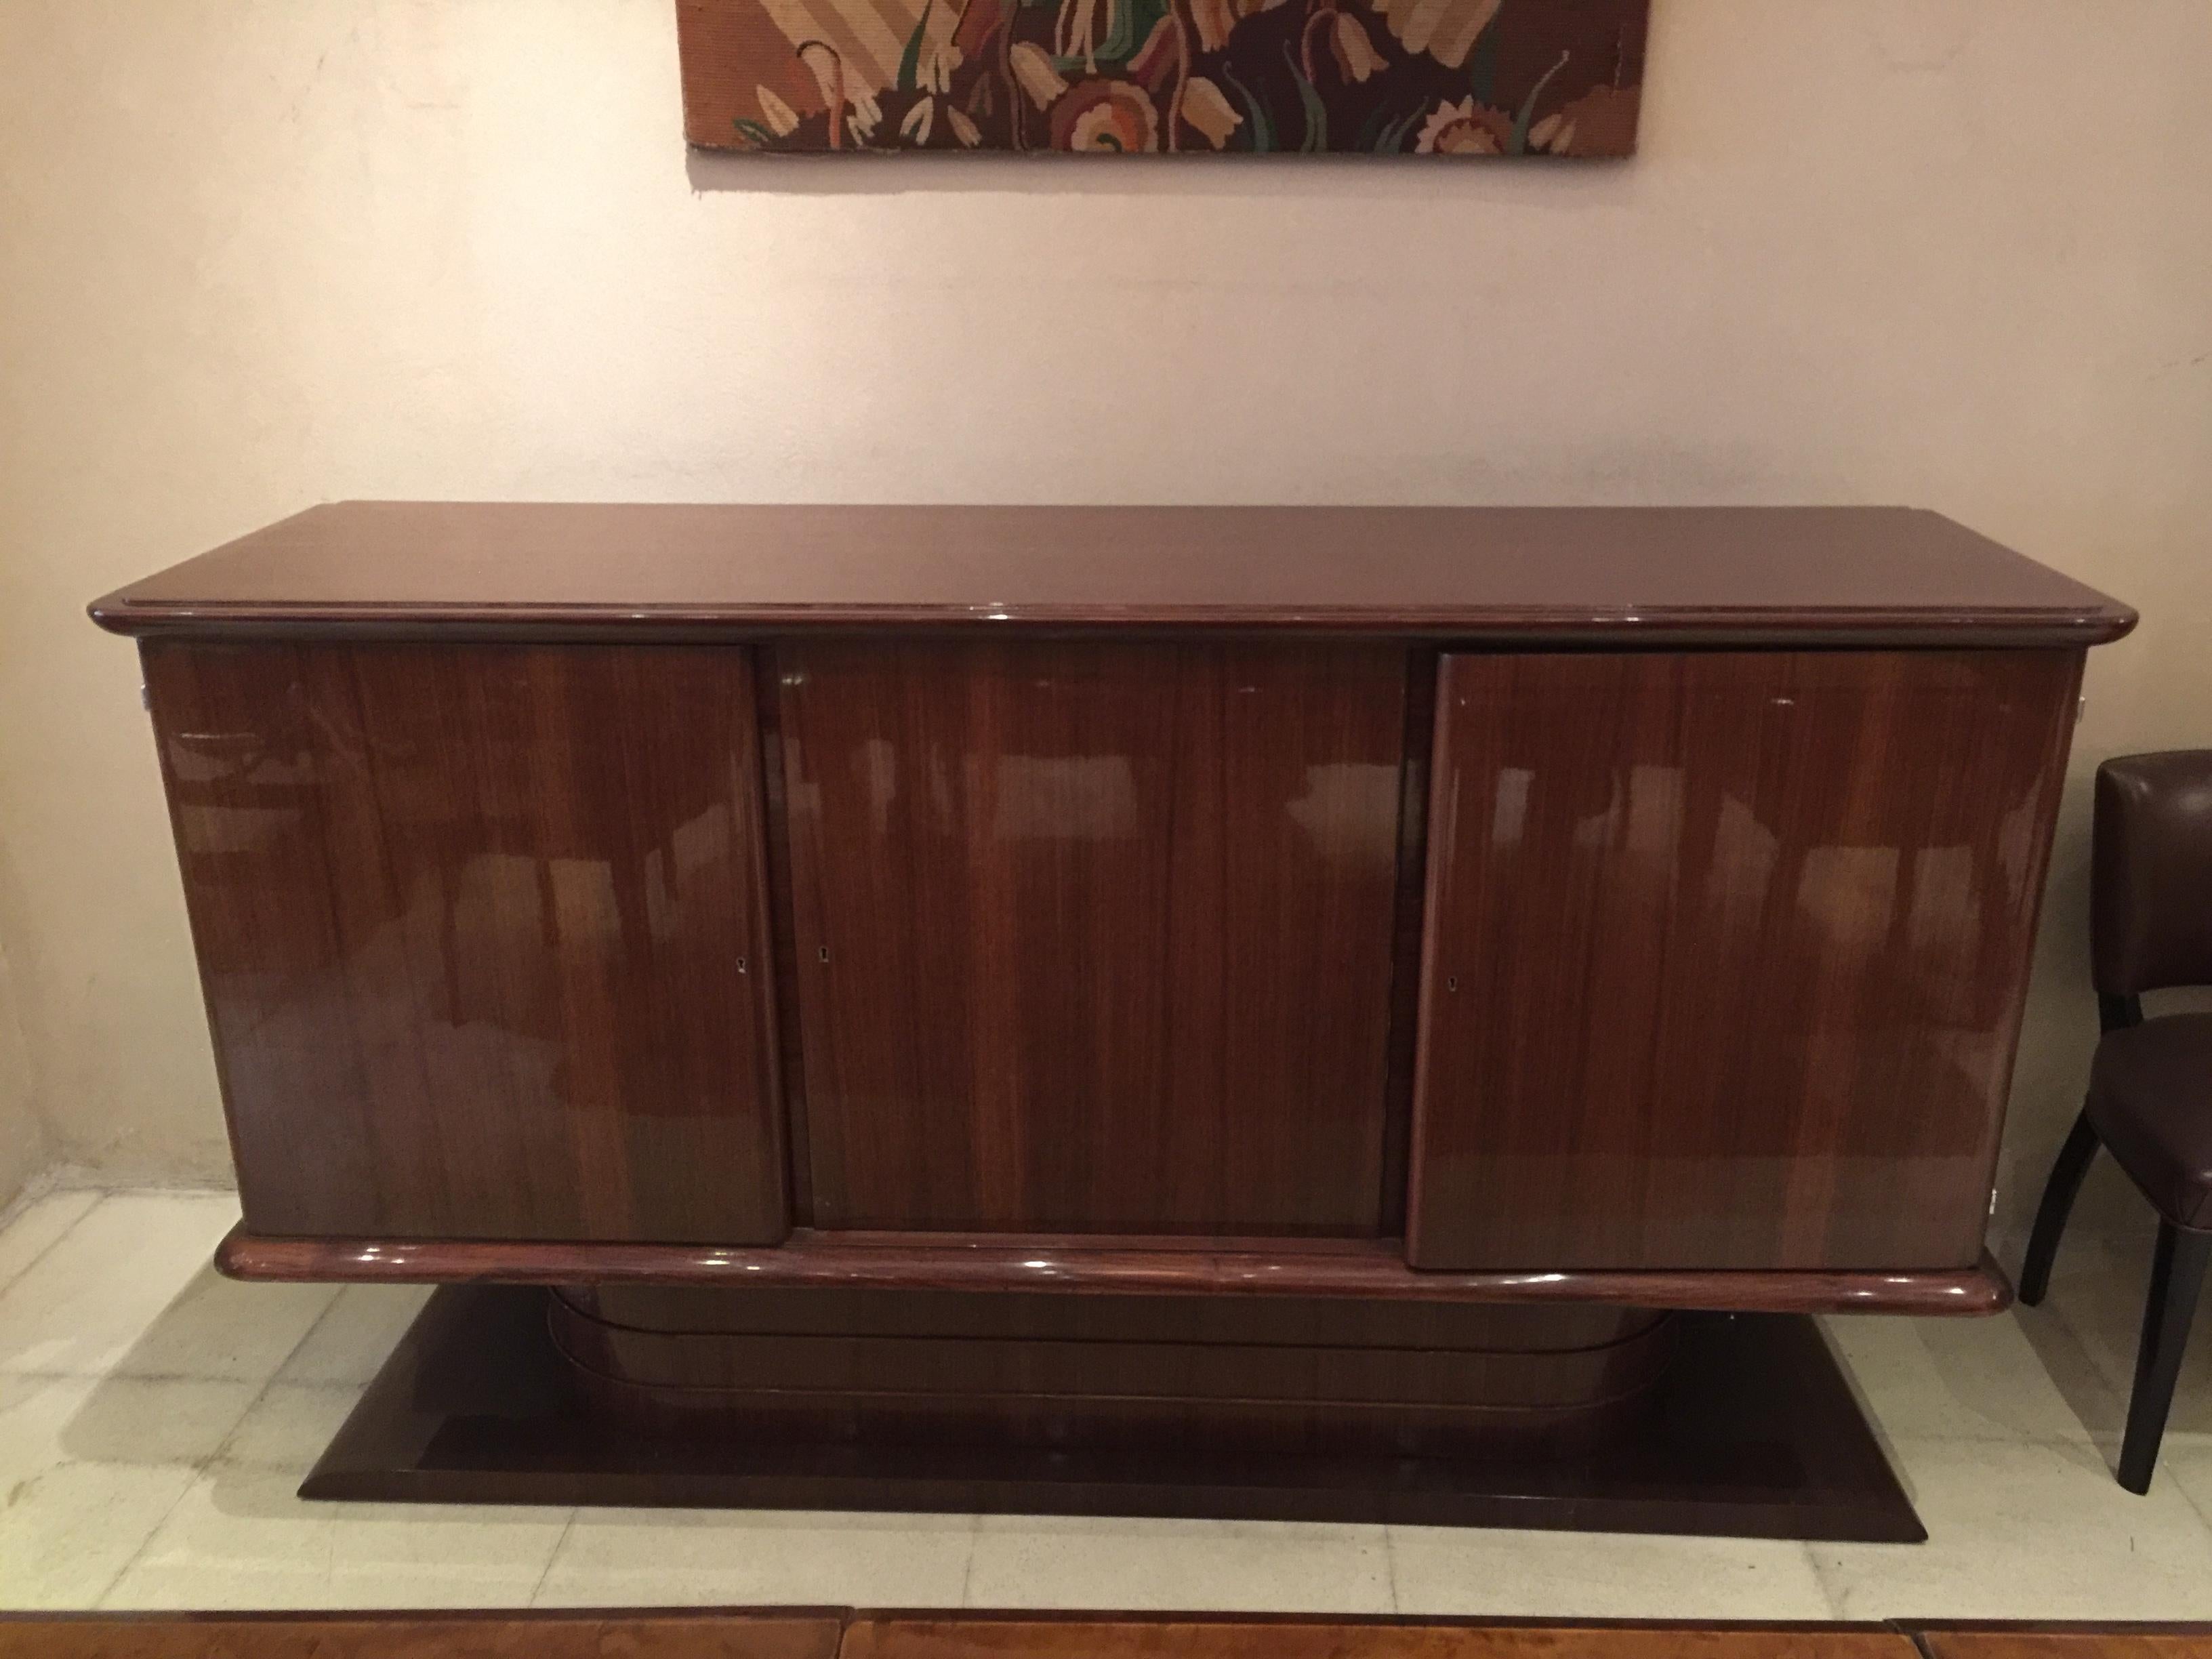 Buffet Art Deco

Material: wood and plated bronze
Style: Art Deco
Country: France
We have specialized in the sale of Art Deco and Art Nouveau styles since 1982.If you have any questions we are at your disposal.
Pushing the button that reads 'View